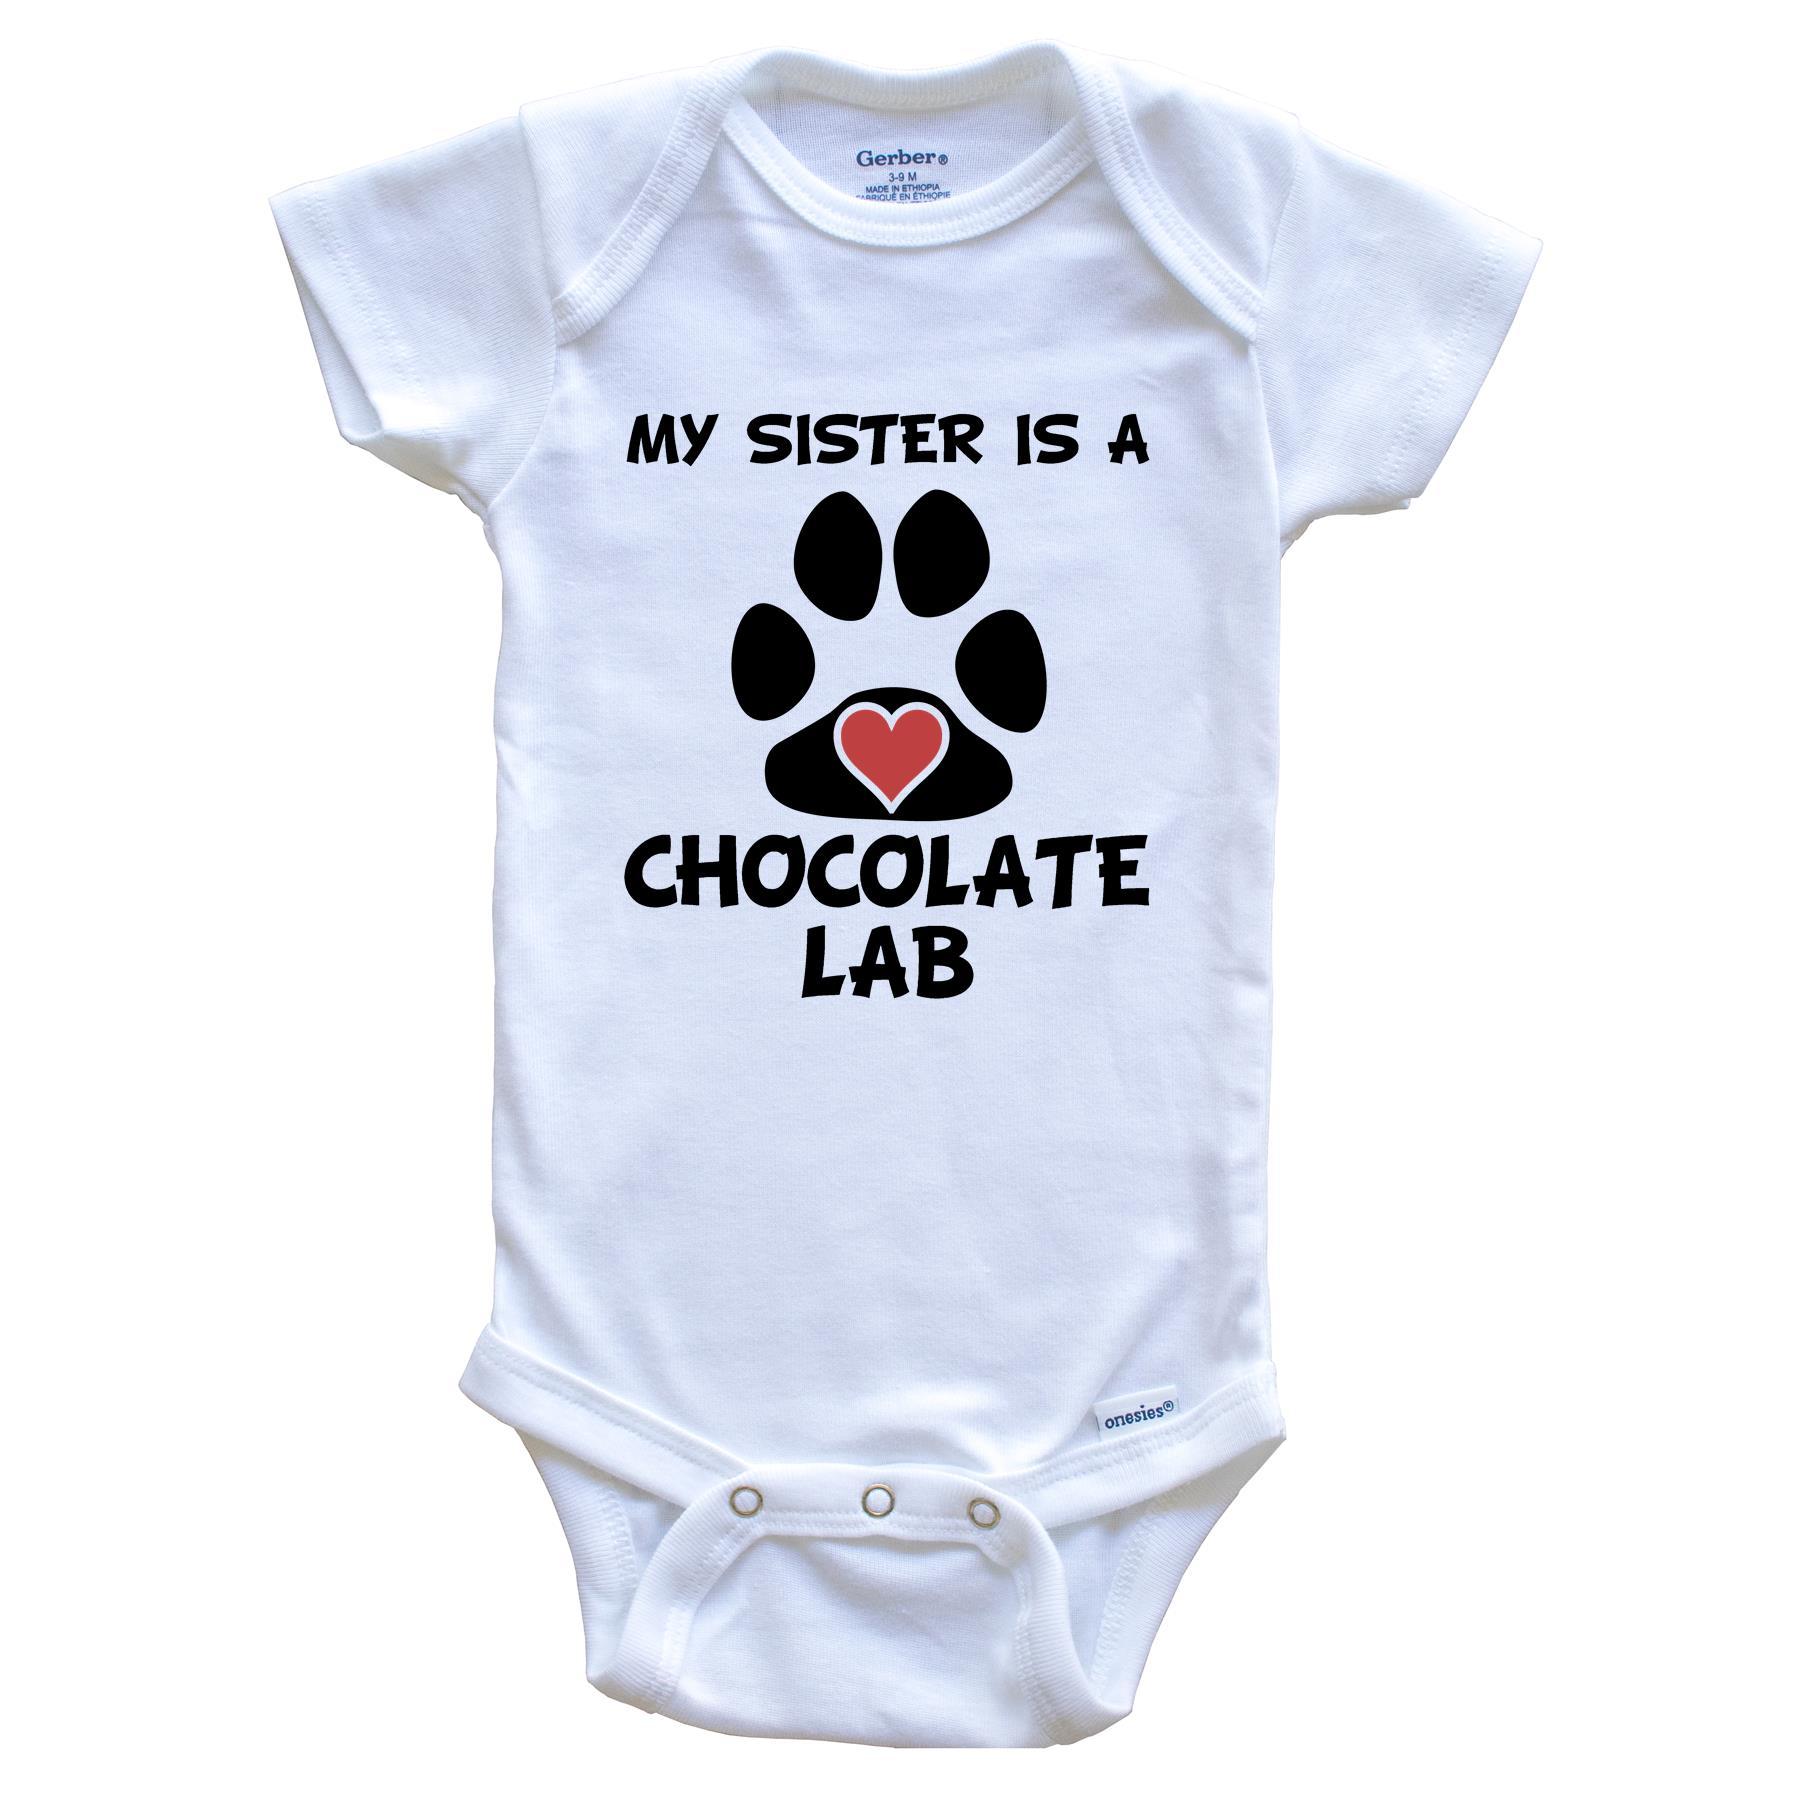 My Sister Is A Chocolate Lab Baby Onesie